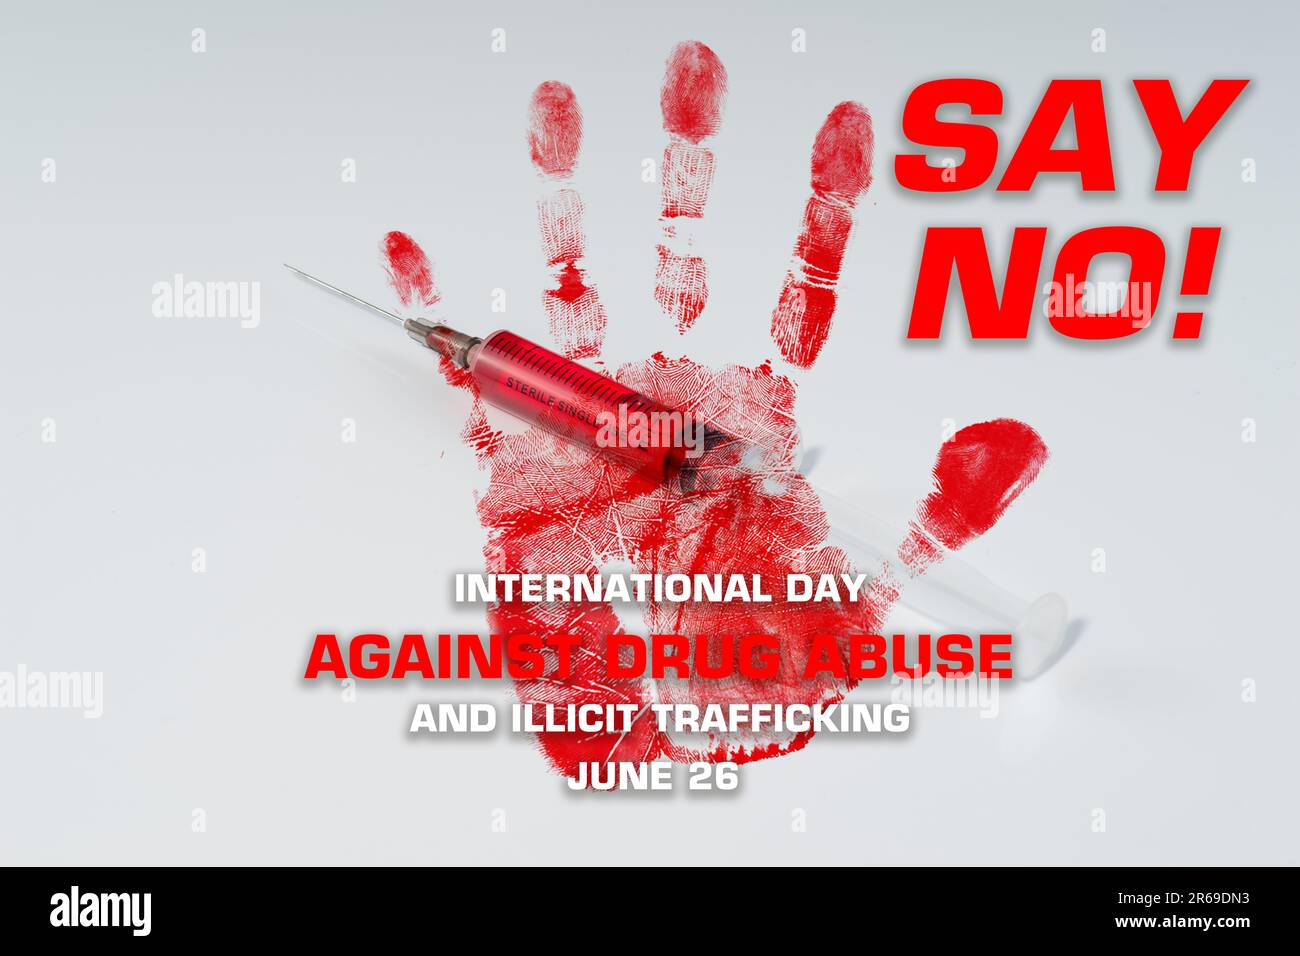 International day against drug abuse and illicit trafficing,Legal concept Stock Photo